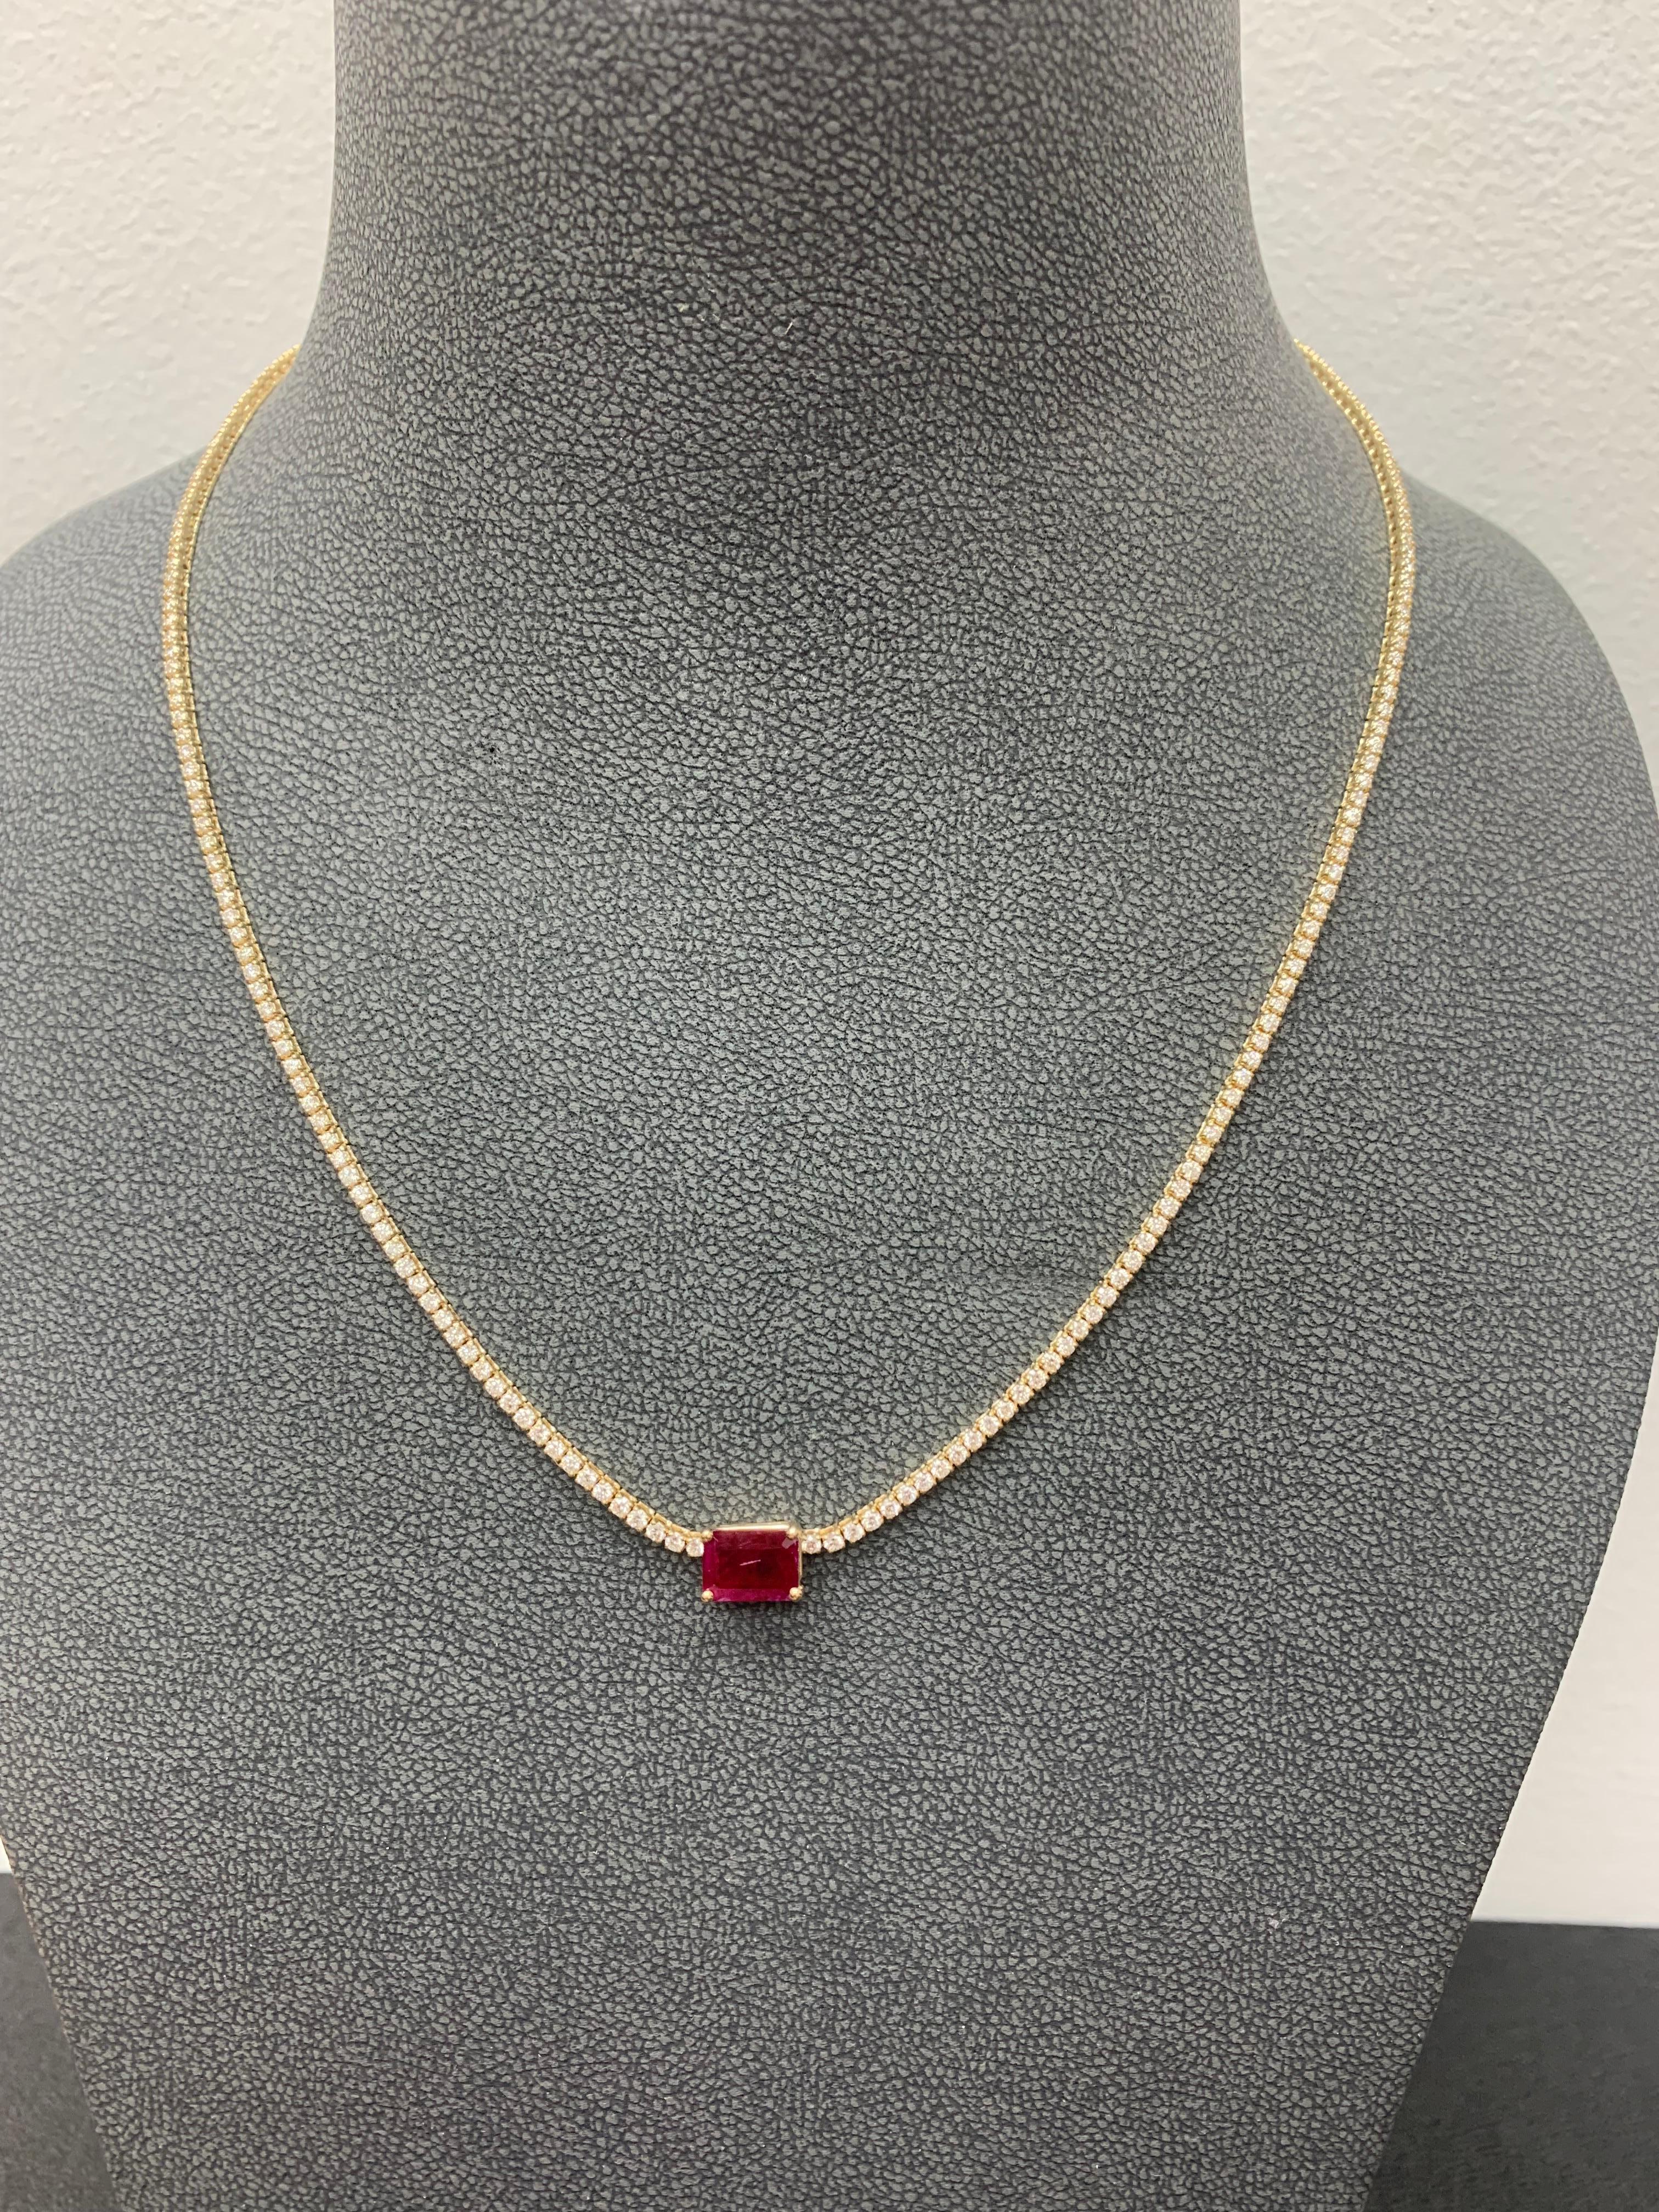 Modern 1.49 Carat Emerald Cut Ruby and Diamond Tennis Necklace in 14K Yellow Gold For Sale